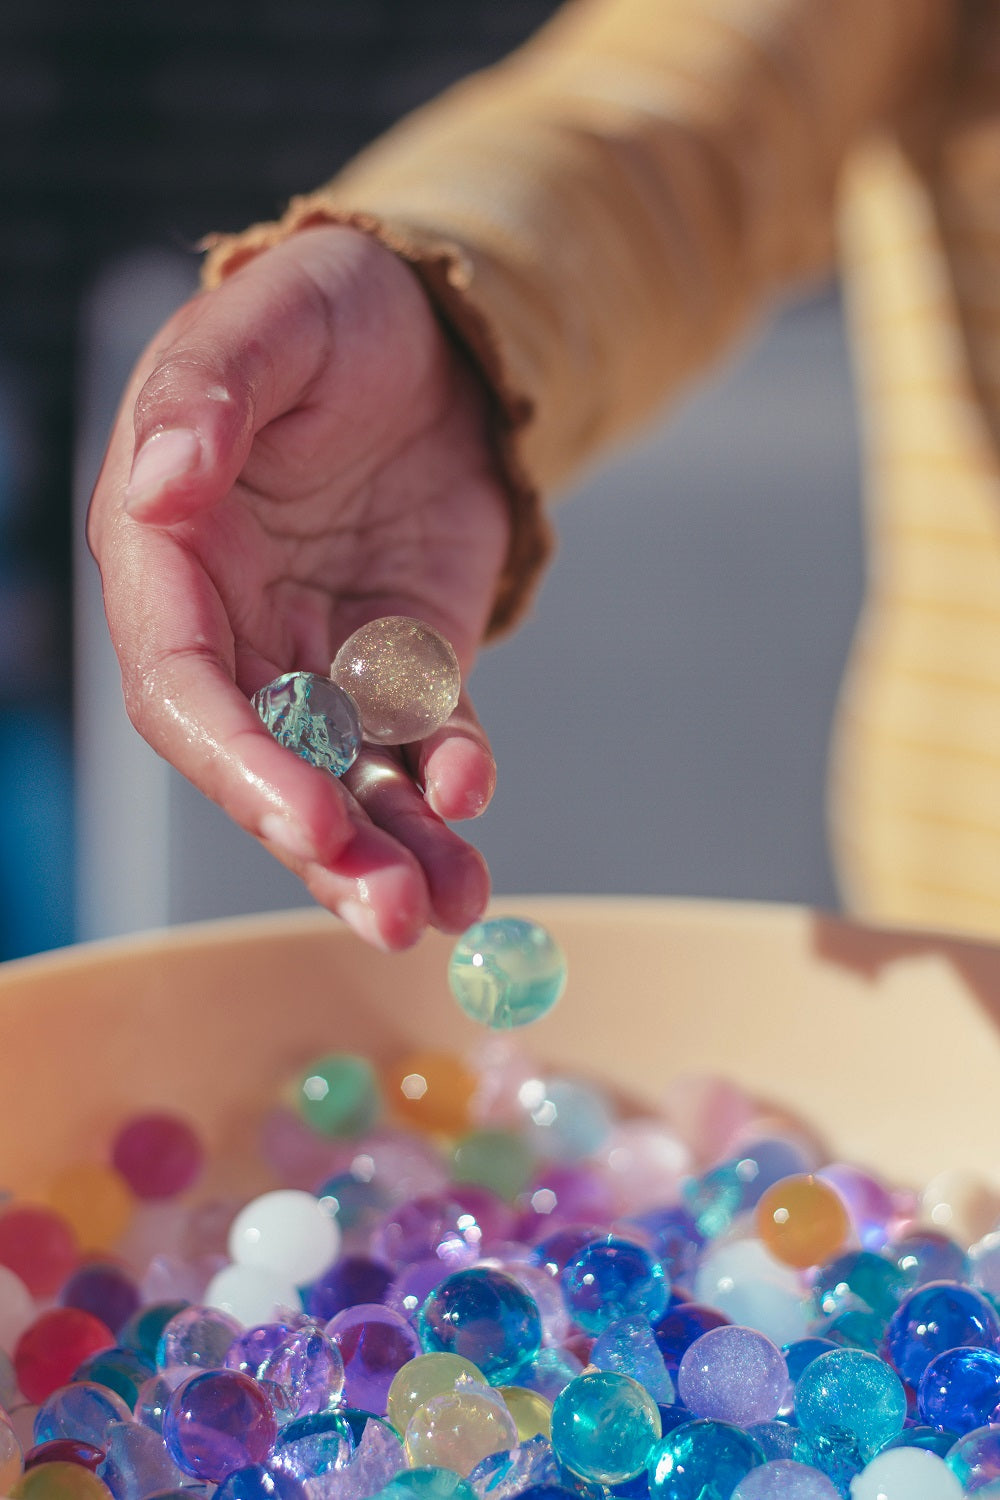 Sensory play with crystals: Tips and ideas